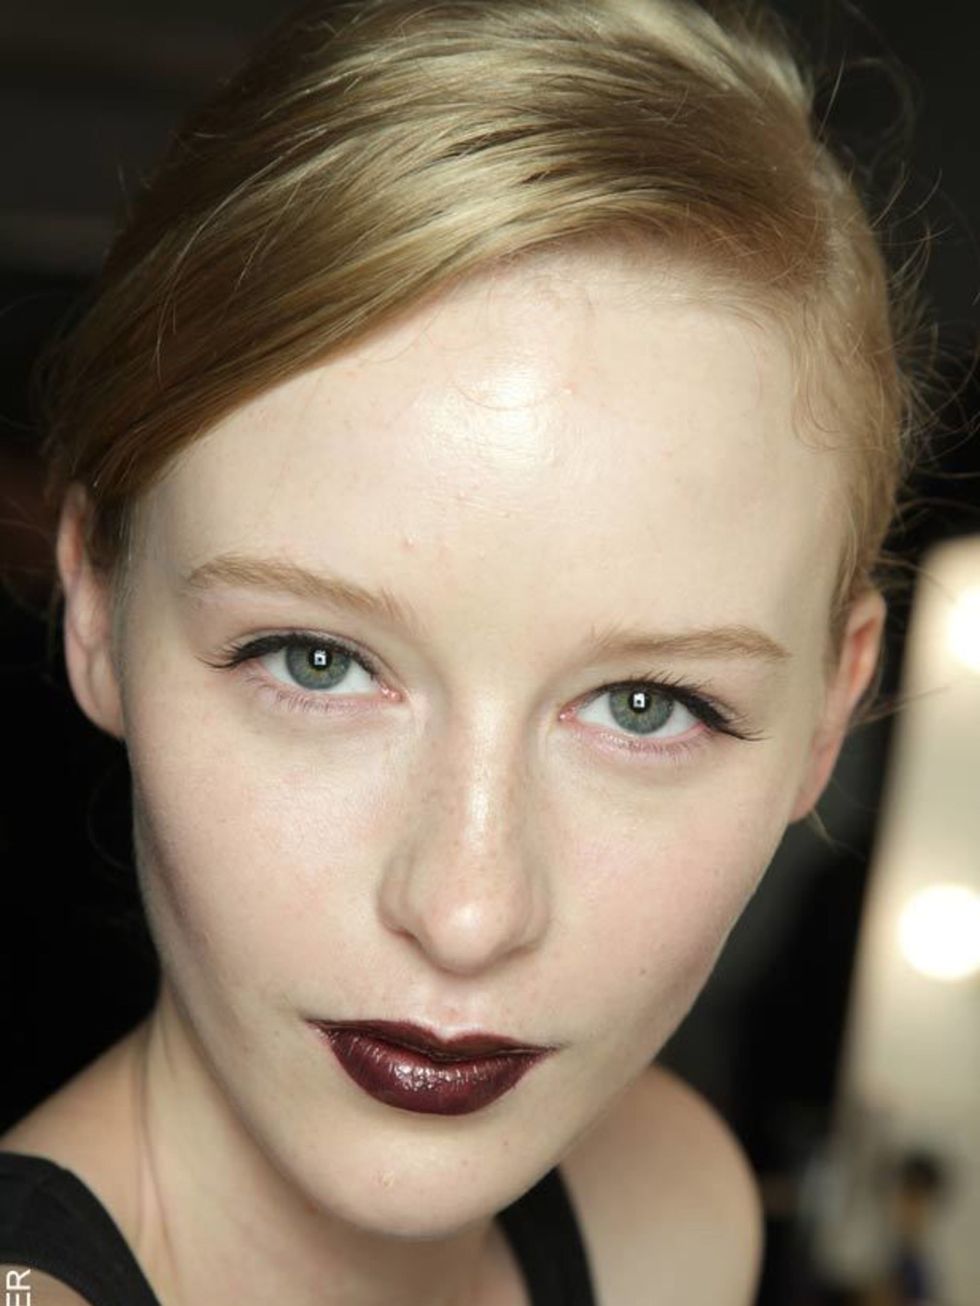 <p><a href="http://blogs.elleuk.com/beauty-notes-daily/2009/06/16/lip-service/">Click here</a> for tips on finding your perfect lip shade...</p>